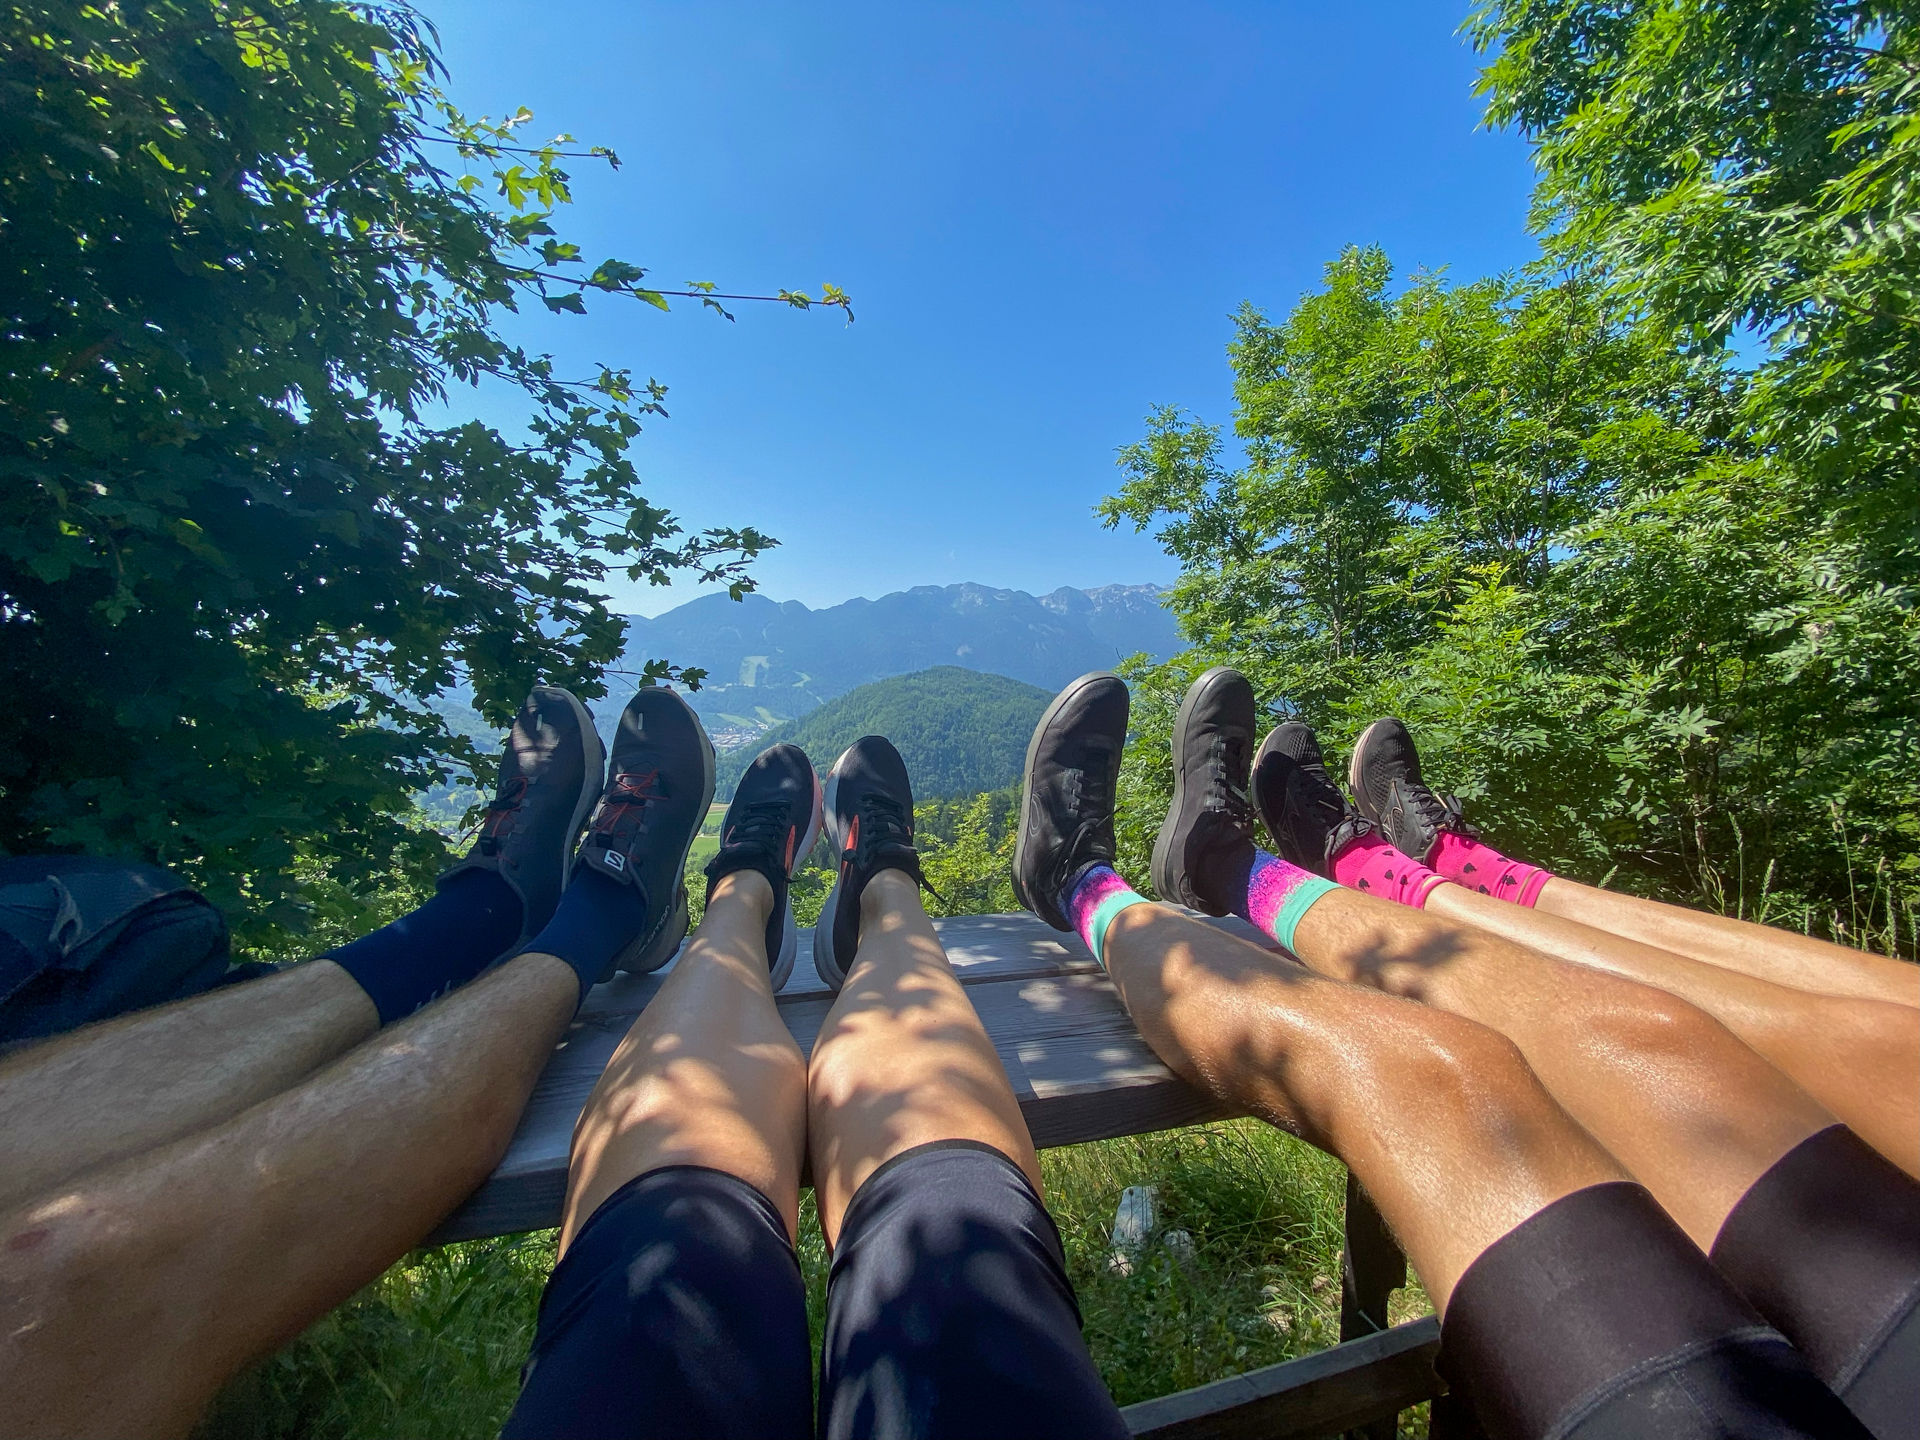 Four sets of sneaker-clad feet rest on a bench with mountains in the background.